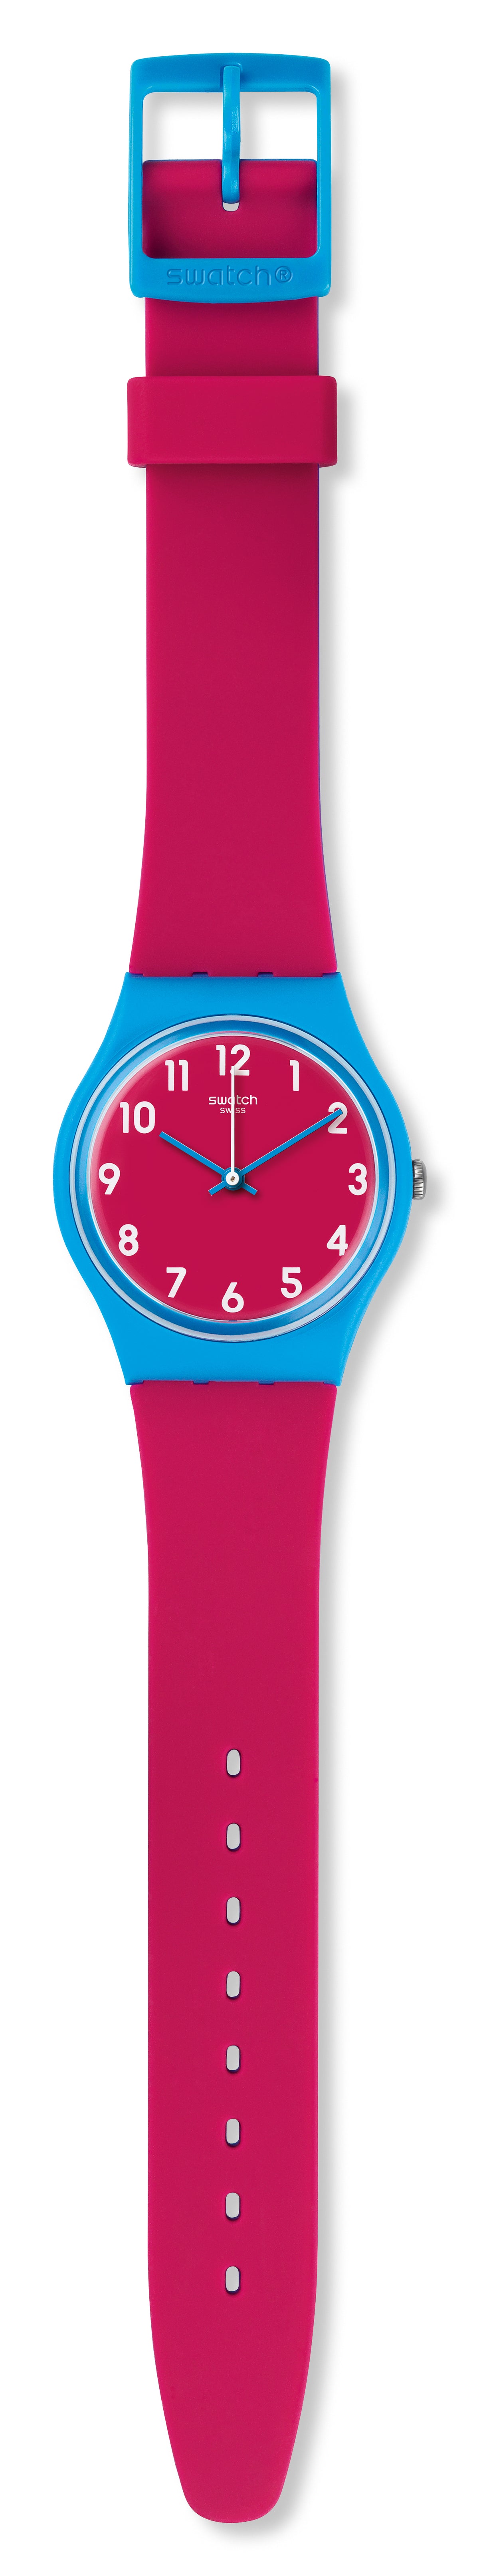 Swatch Watch -Lampone